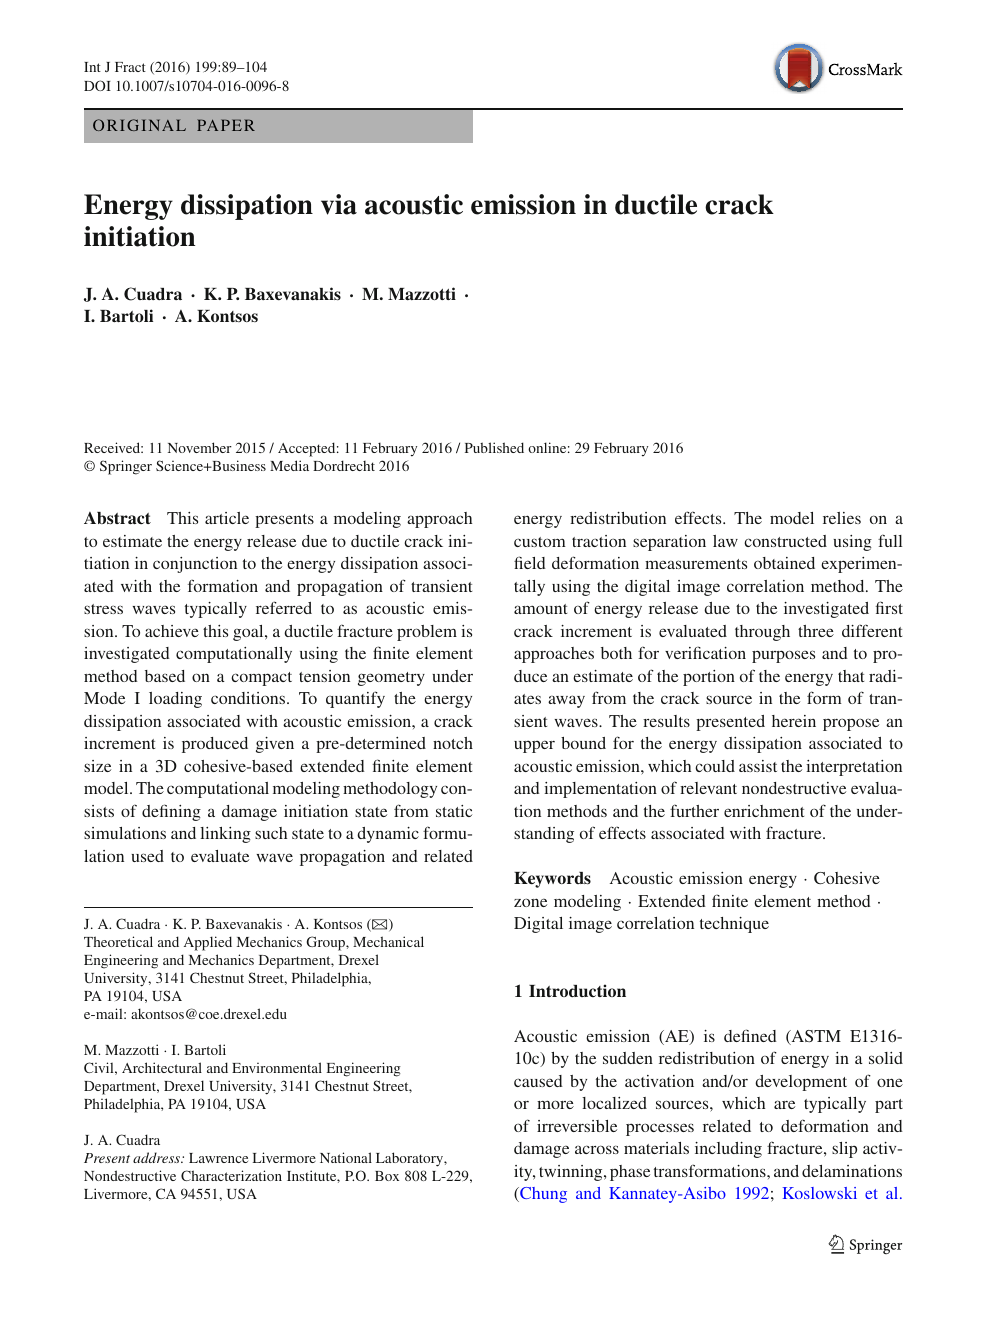 Energy Dissipation Via Acoustic Emission In Ductile Crack Initiation Topic Of Research Paper In Materials Engineering Download Scholarly Article Pdf And Read For Free On Cyberleninka Open Science Hub